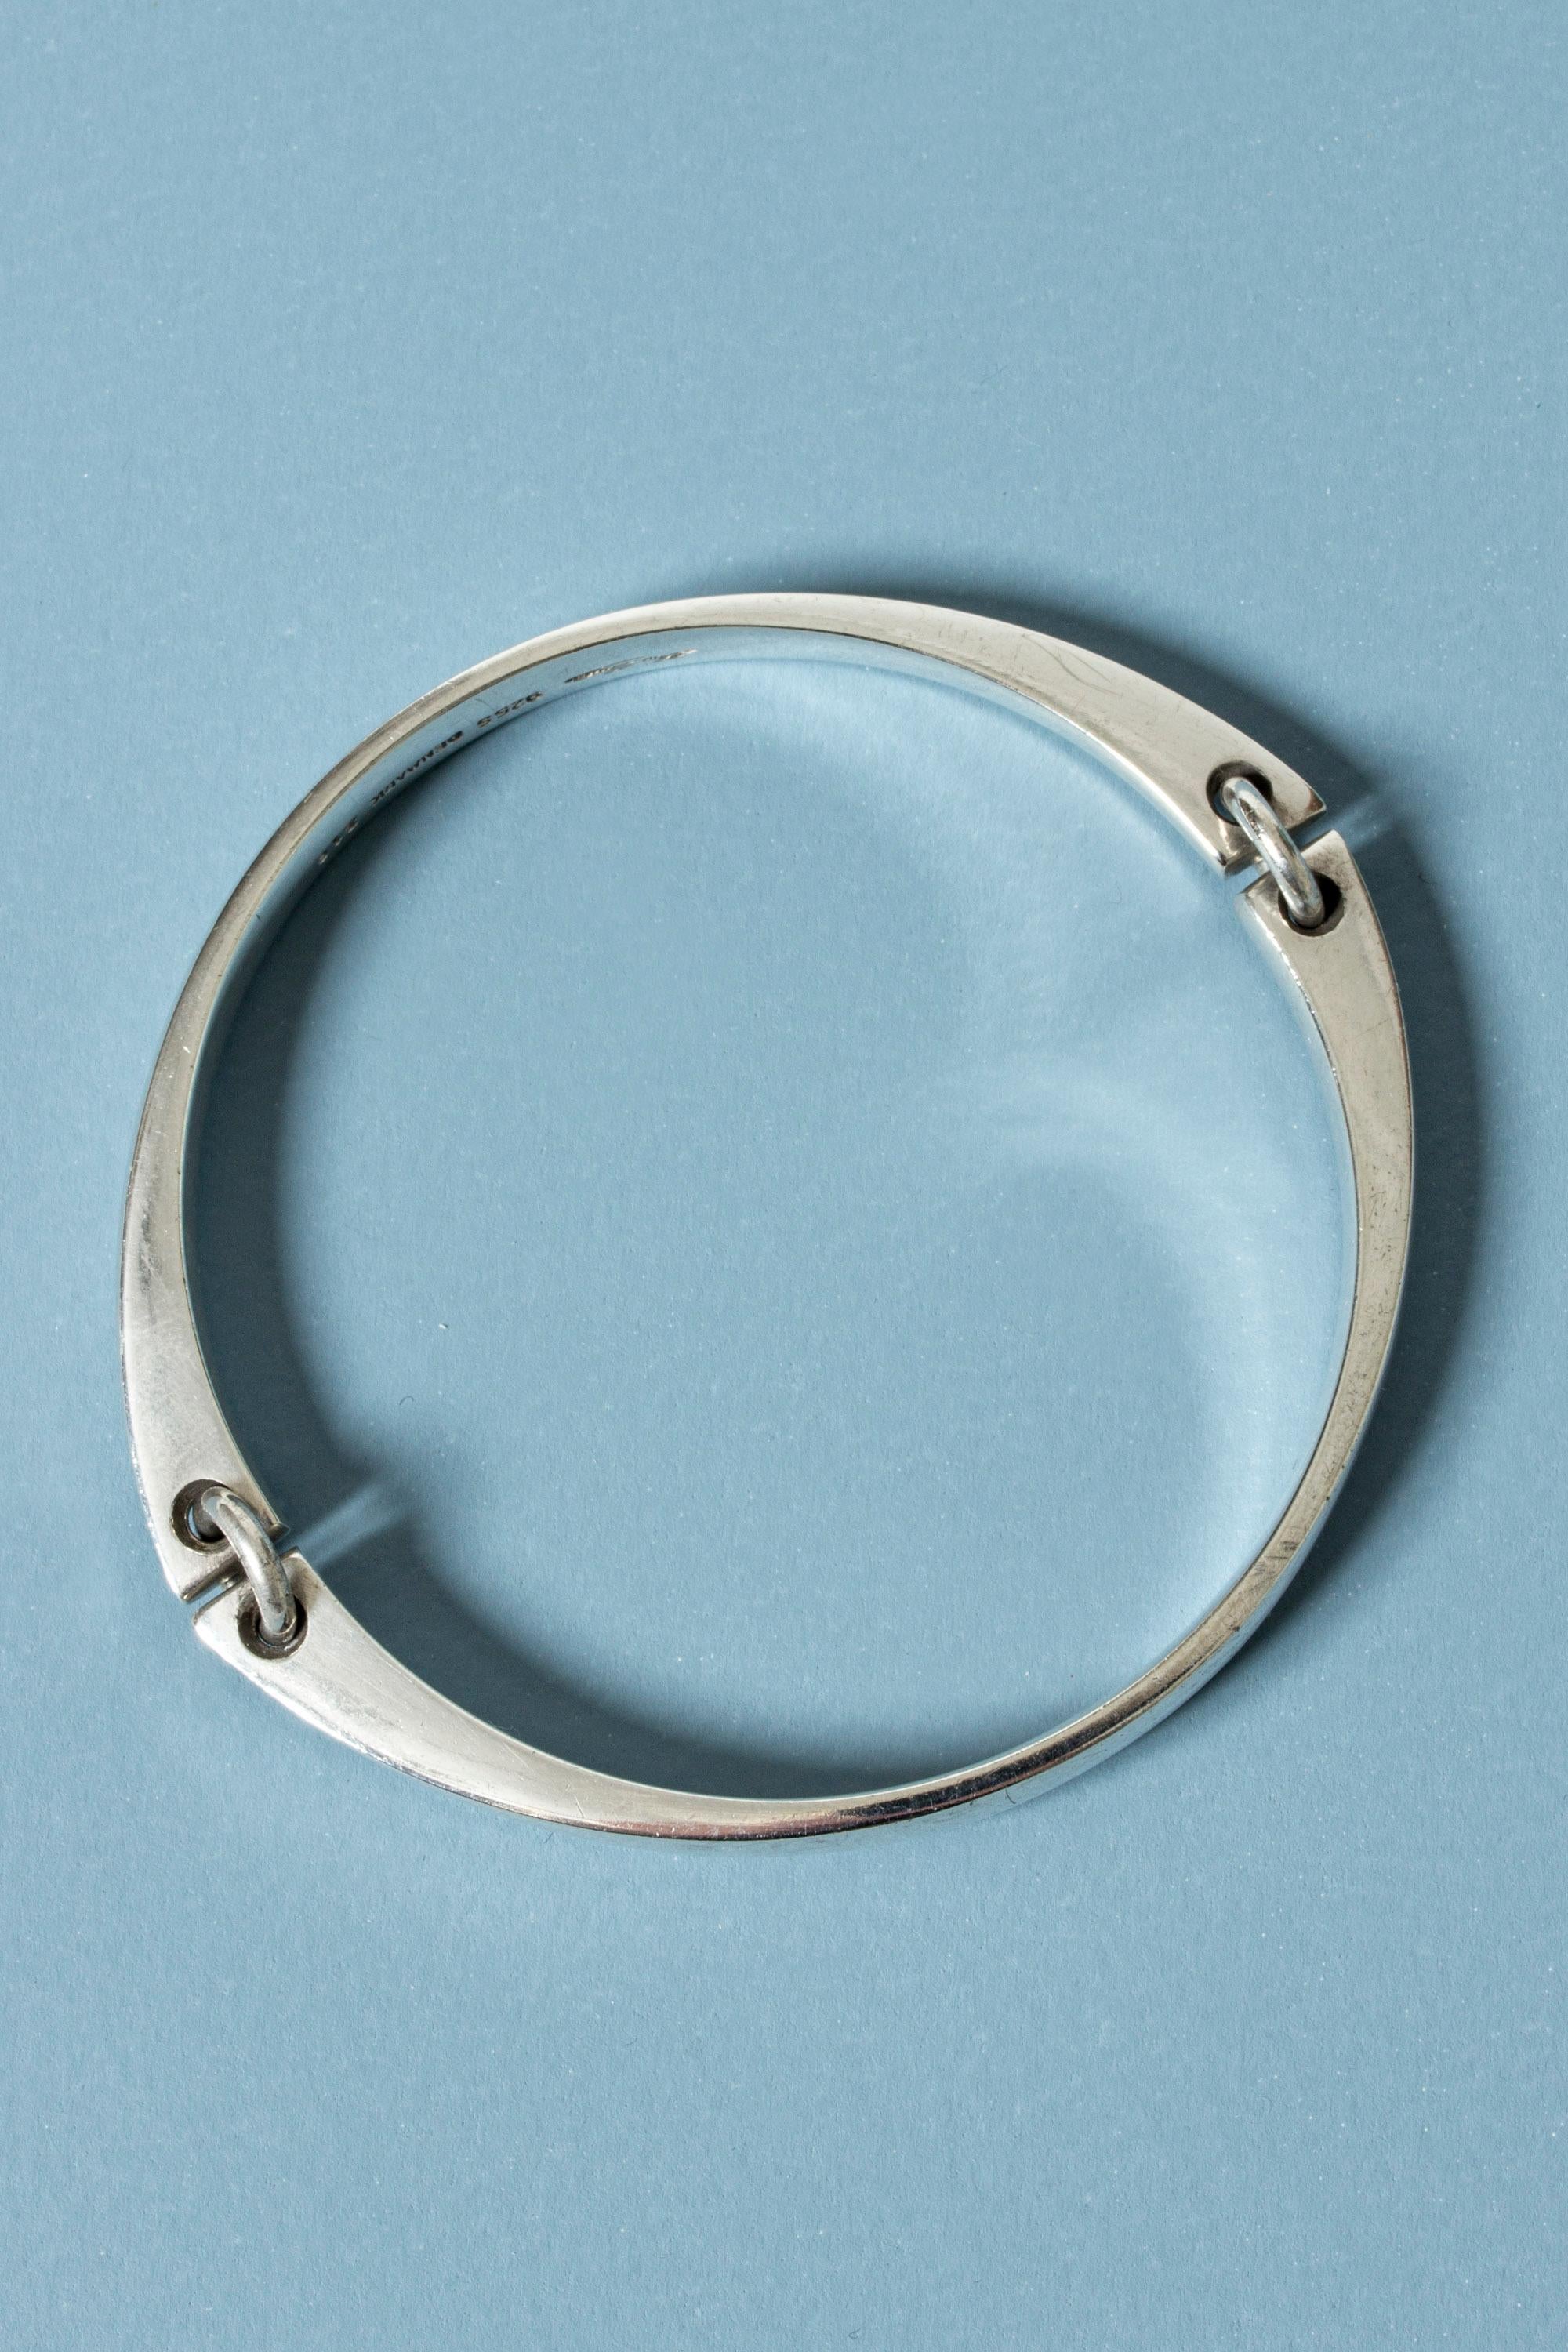 Elegant silver bracelet by Bent Gabrielsen Pedersen in a sophisticated, clean design where to segments are linked by two silver hoops. Sits nicely around the wrist, subtly expressive.